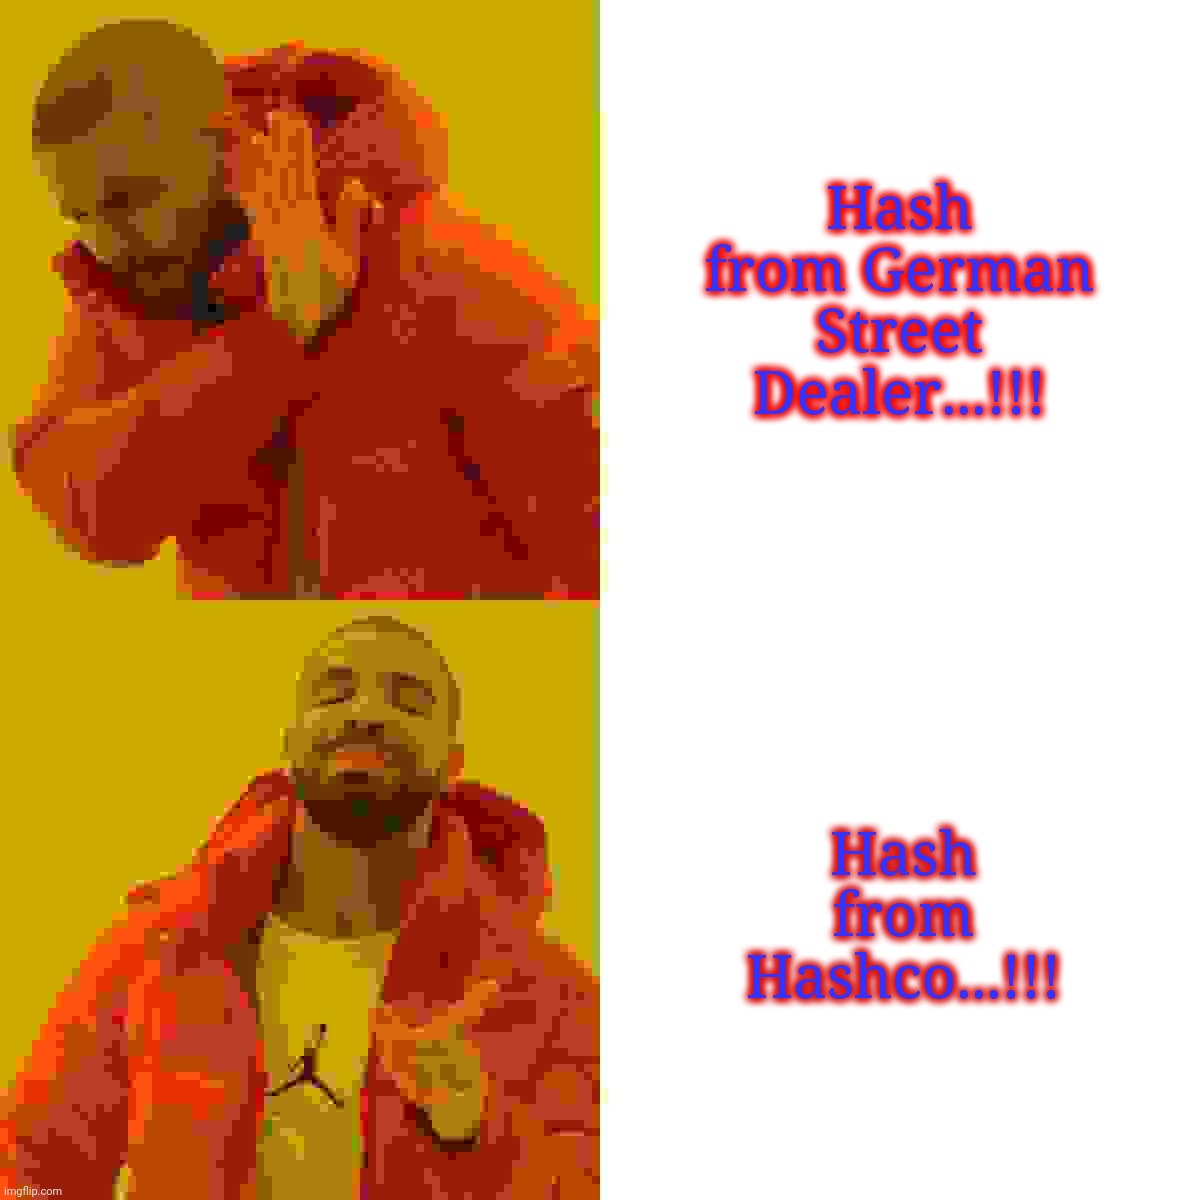 Hash from German Street Dealer...!!! Hash from Hashco...!!! | image tagged in memes,drake hotline bling | made w/ Imgflip meme maker